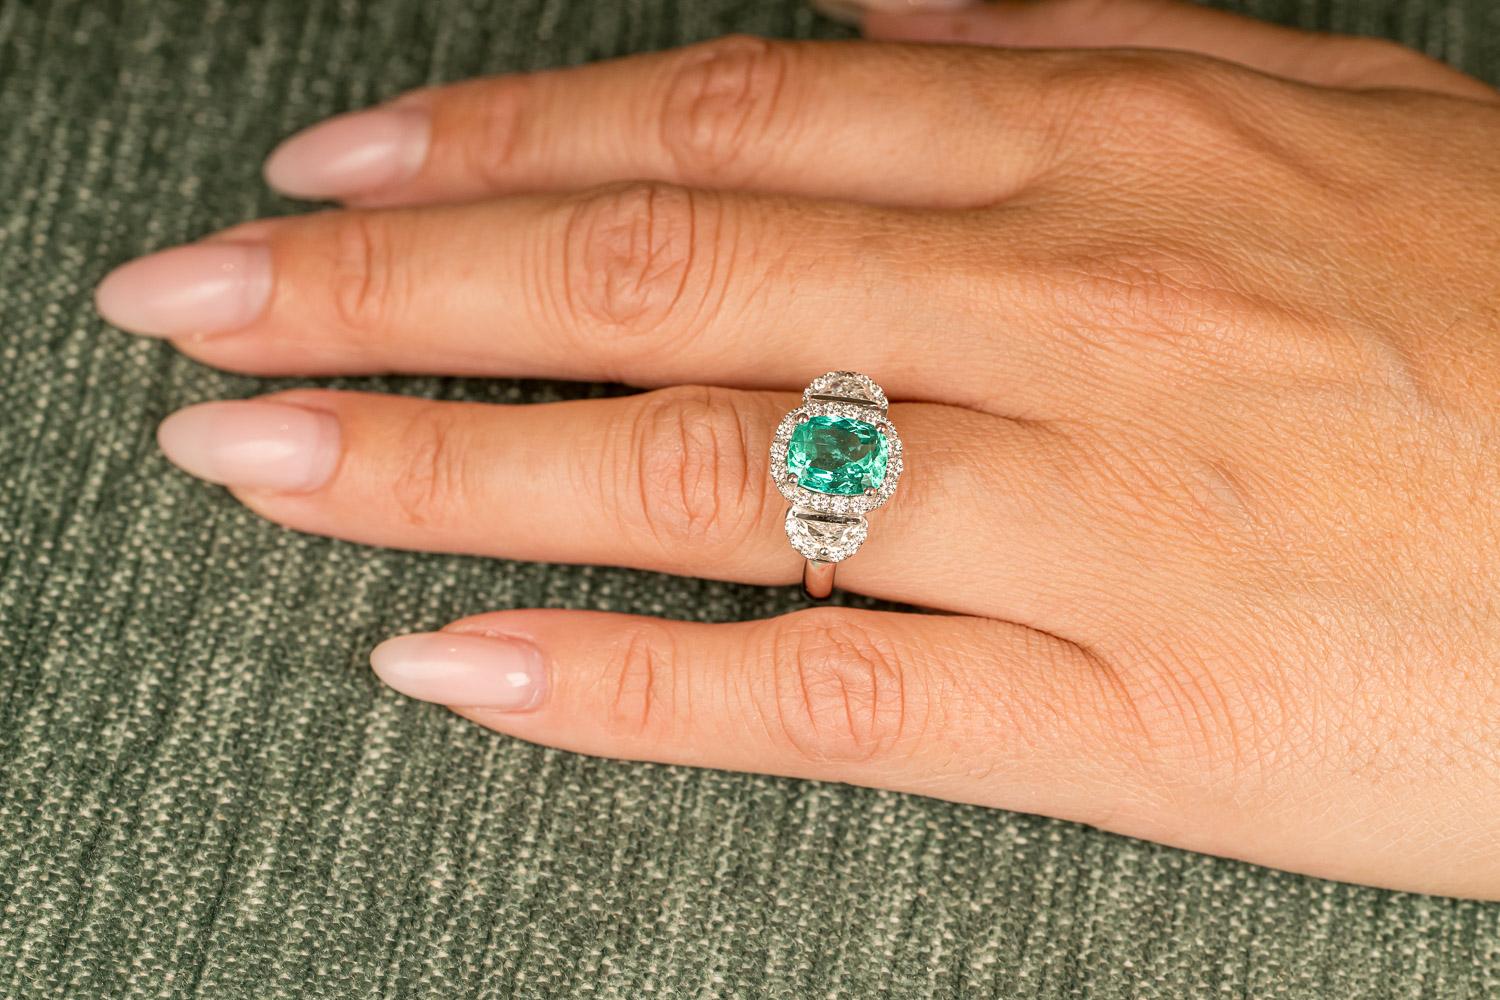 One of a kind three-stone engagement ring in 18-Karat white gold 9,2g set with 1 certified natural green Colombian emerald in cushion cut 2.47 Carat and the finest diamonds in VVS/DE quality in moon cut 0.45 Carat and 0.79-Carat brilliant cut